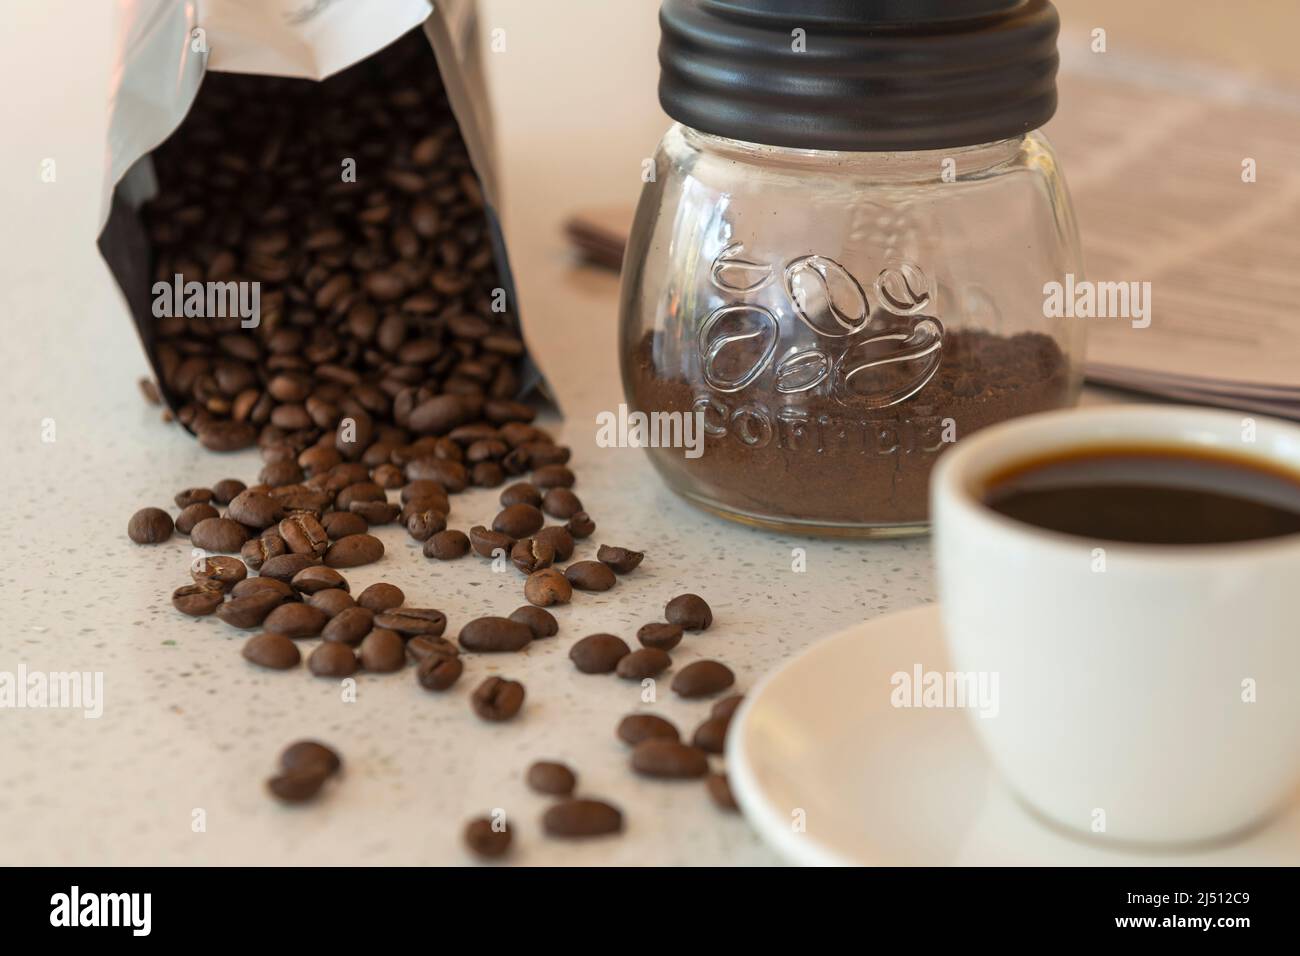 Coffee beans spill from their packet on a benchtop with a cup of coffee and ground coffee nearby. Stock Photo